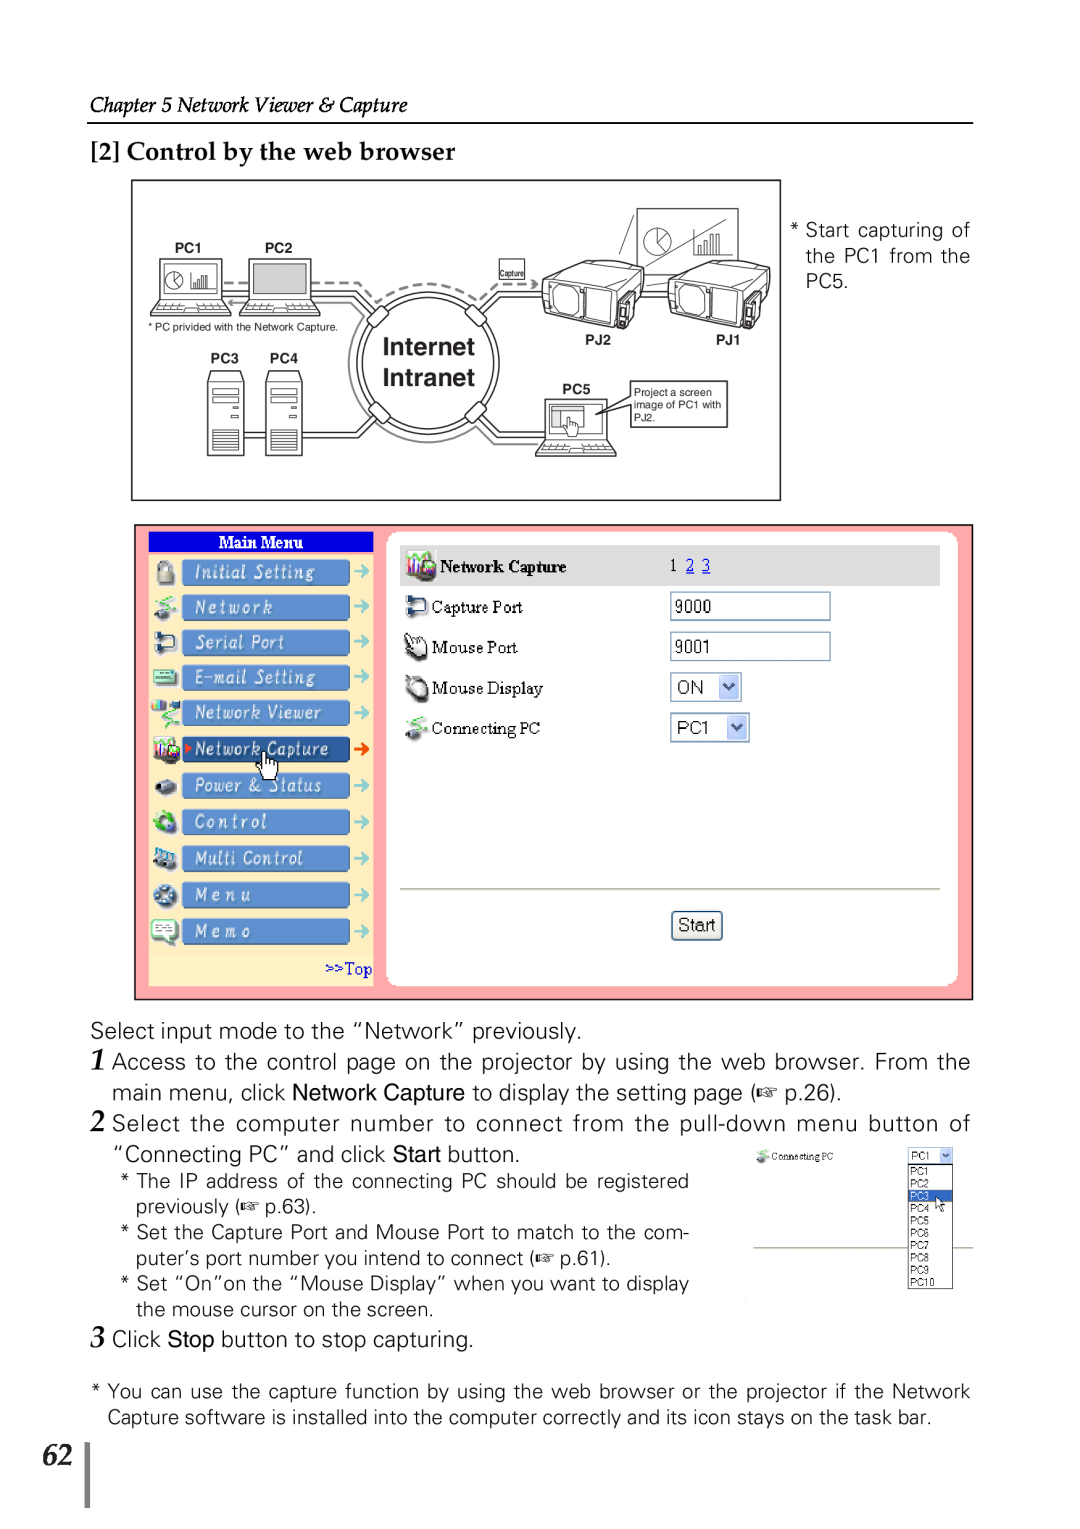 Sanyo POA-PN02 owner manual Control by the web browser, Internet, Intranet 